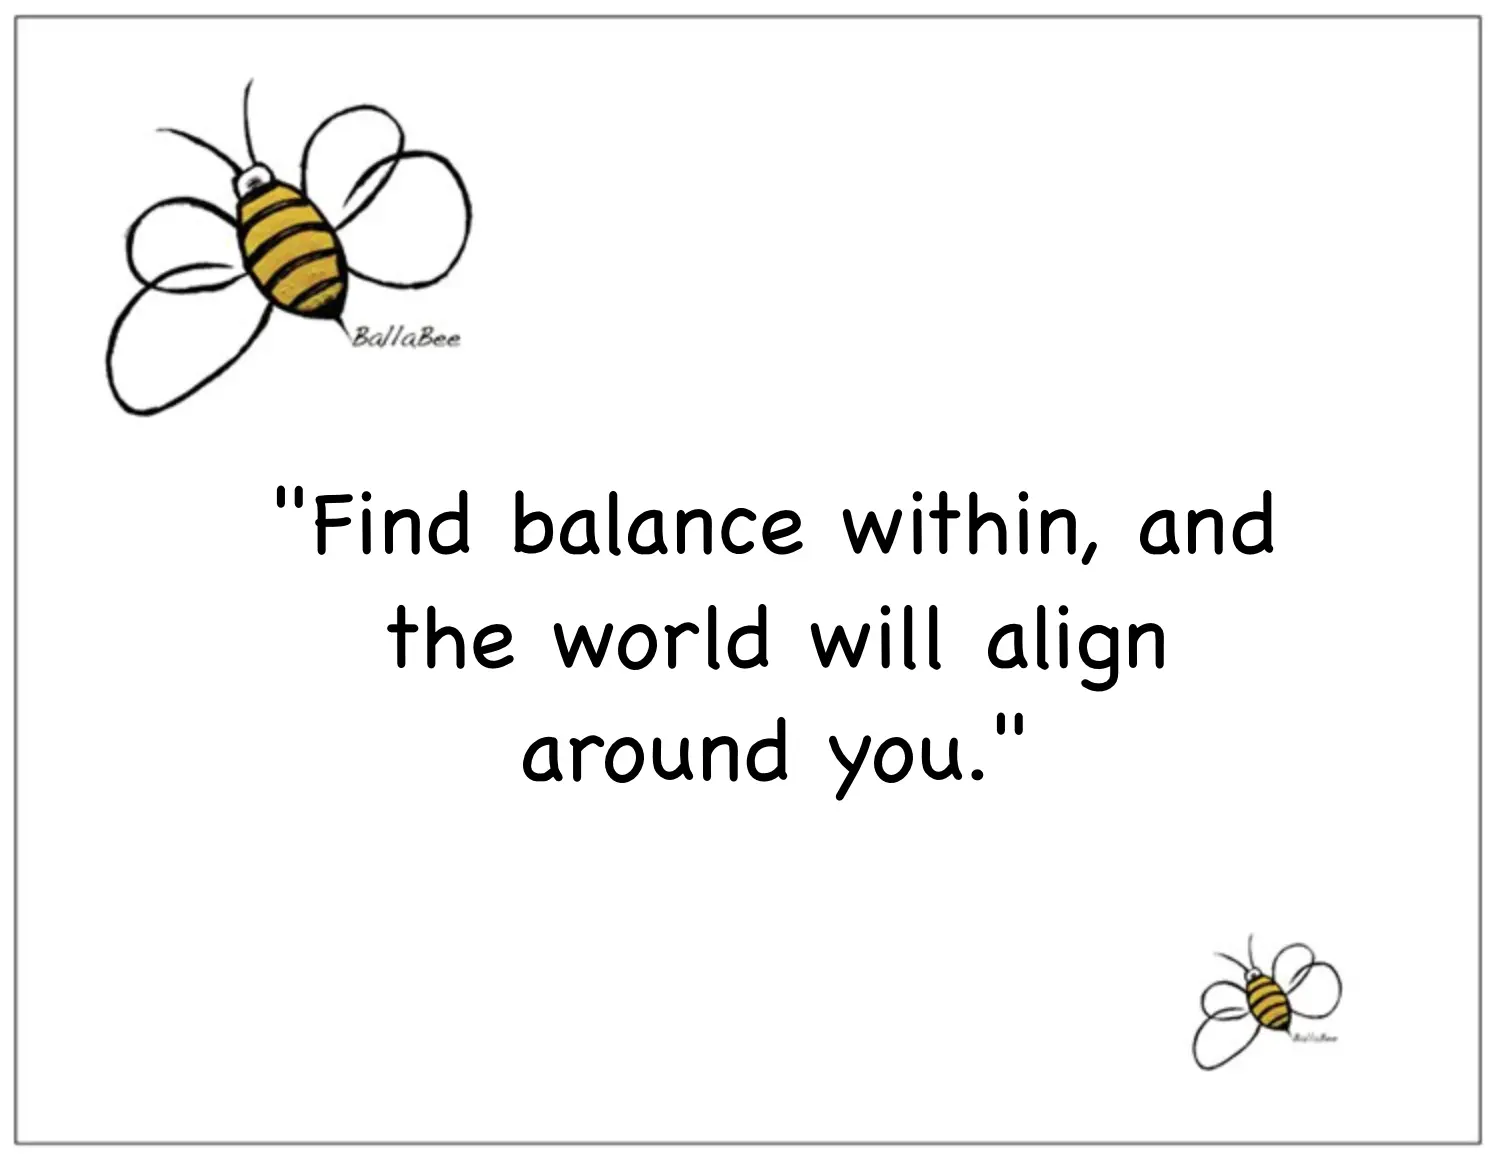 Find balance within, and the world will align around you